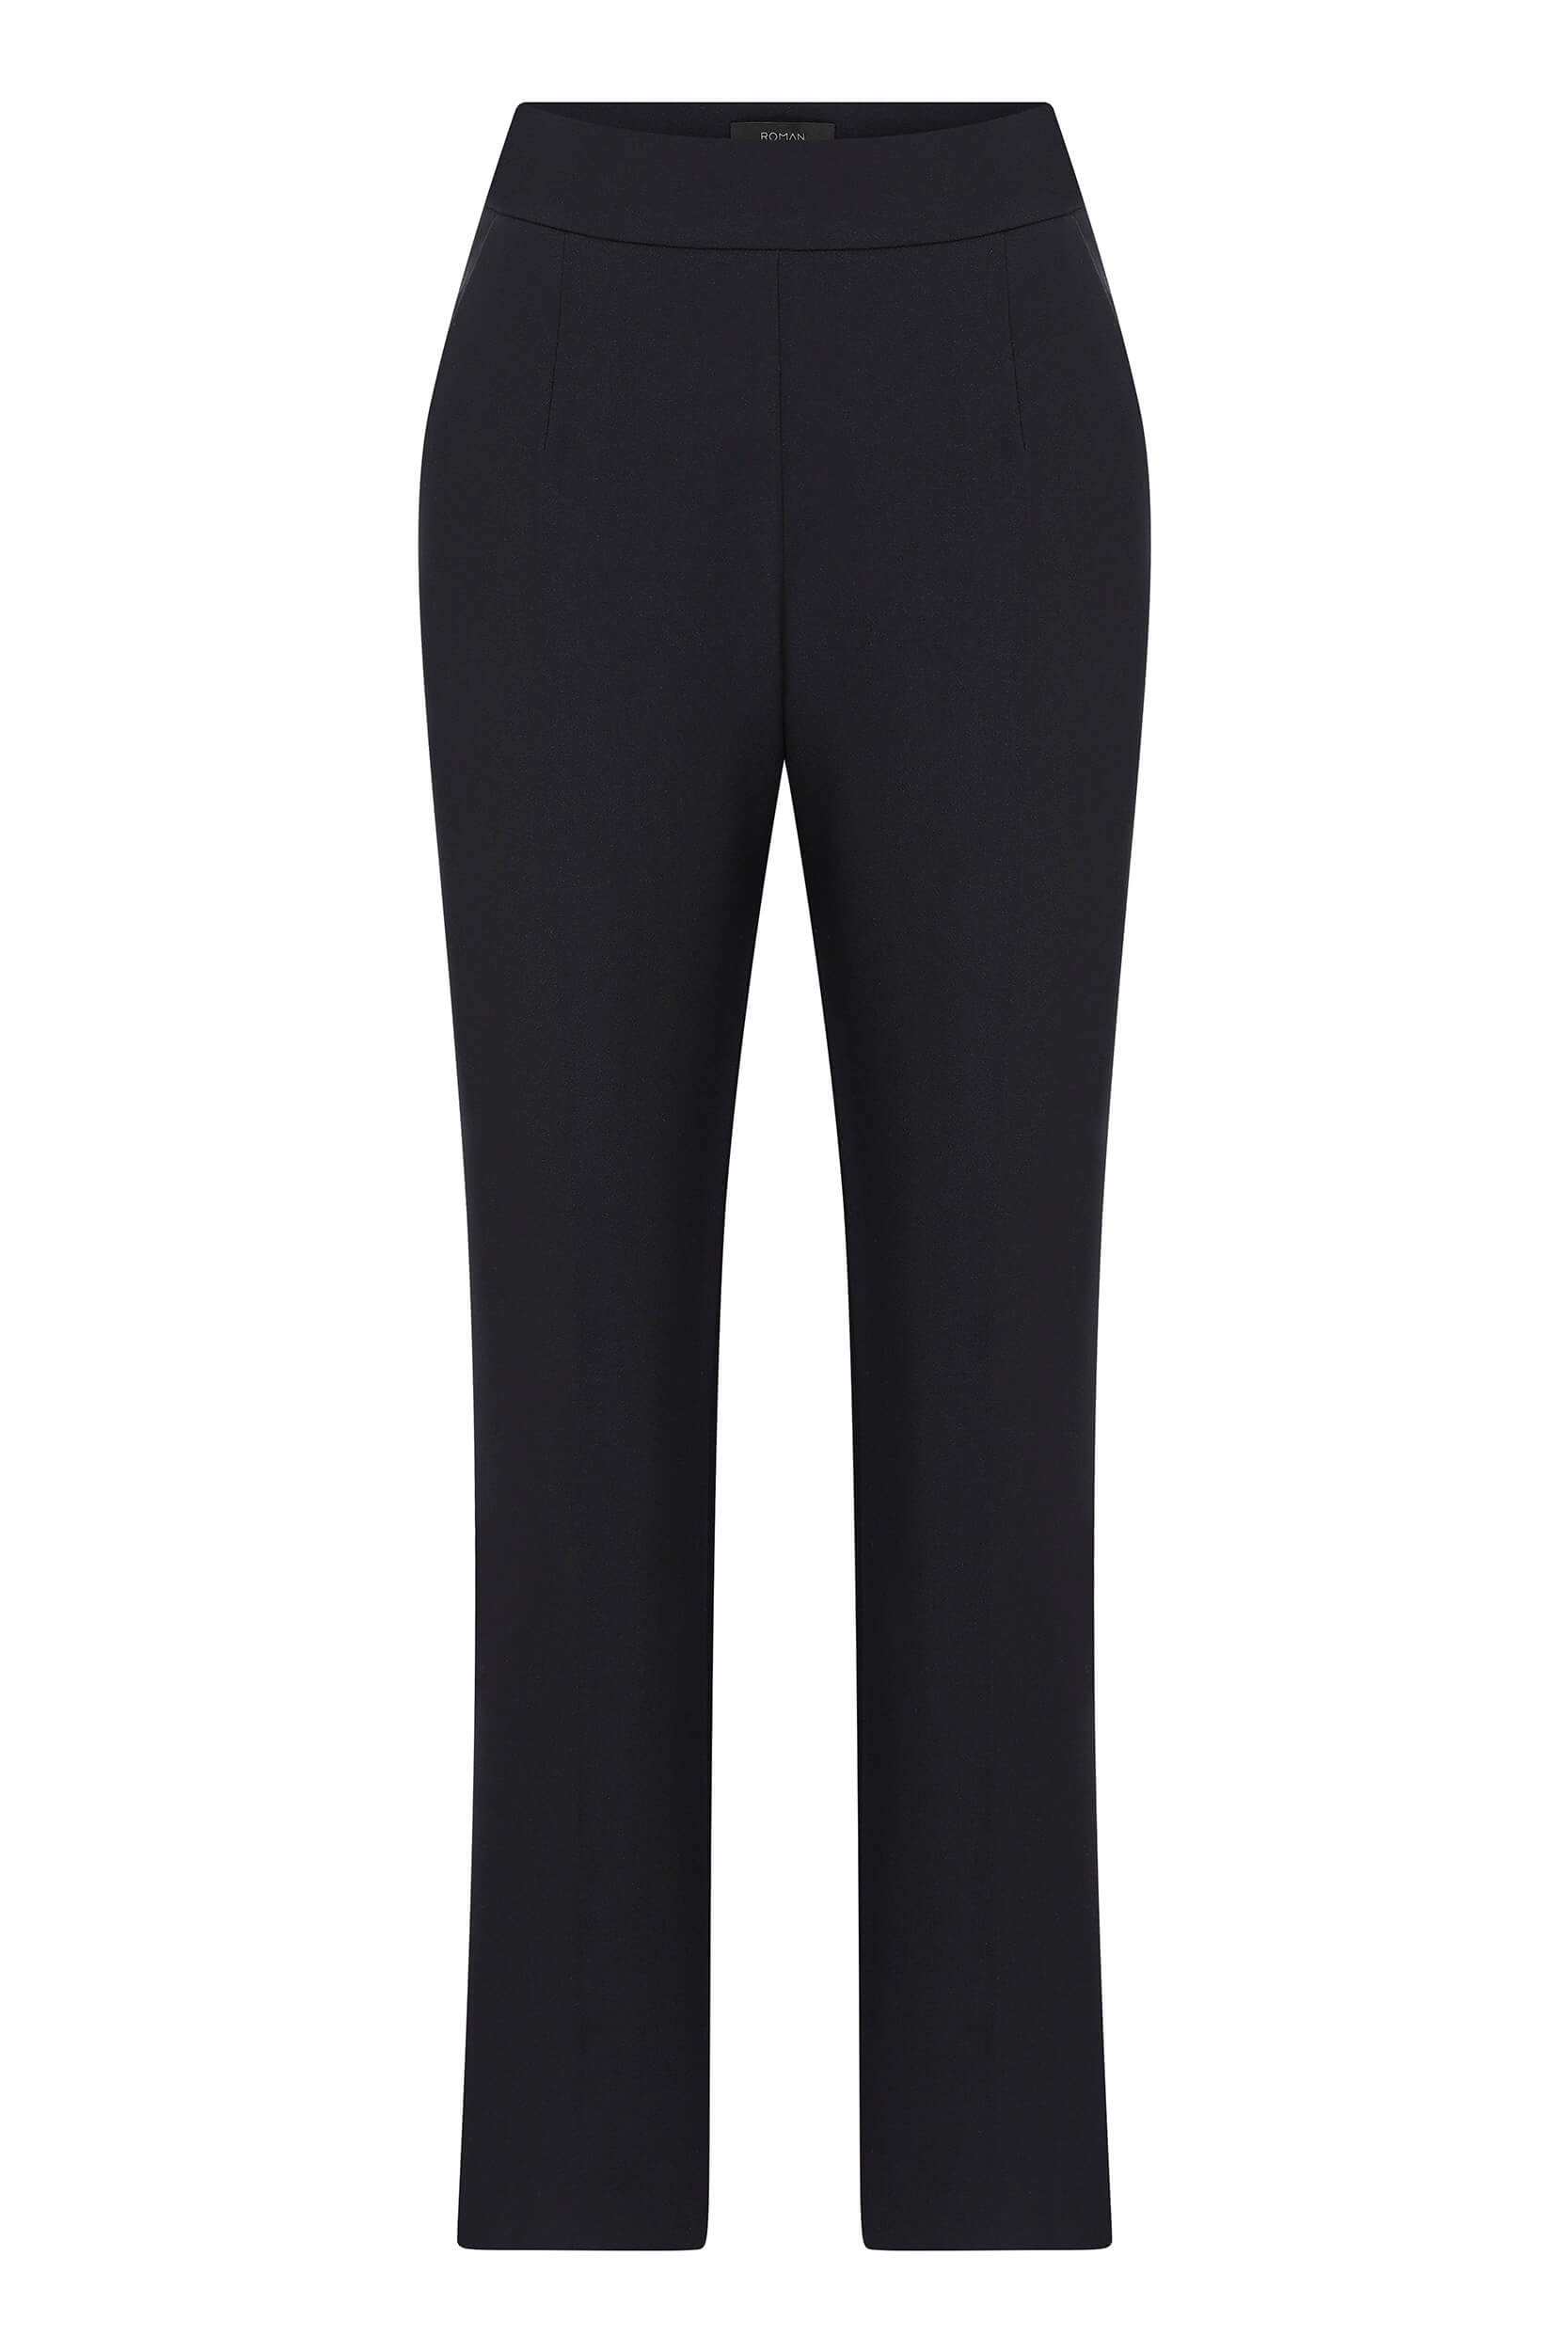 Polyester Plain Women Navy Blue Smart Flared Solid Parallel Trousers at Rs  295/piece in New Delhi